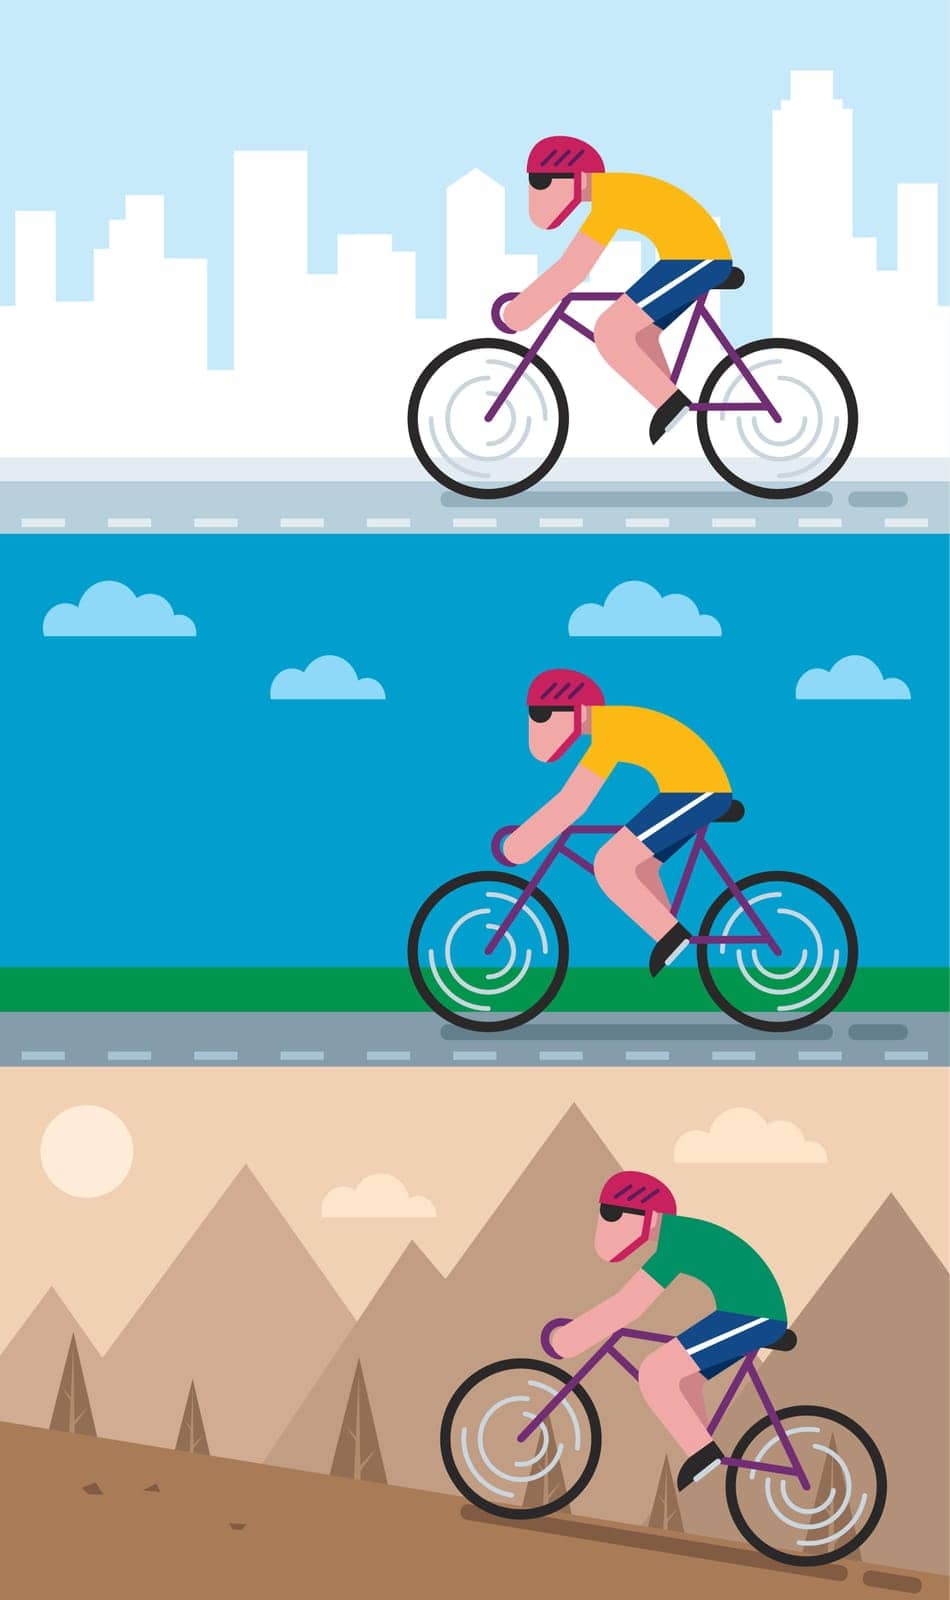 Set of 3 flat design illustrations of character cycling through different areas.